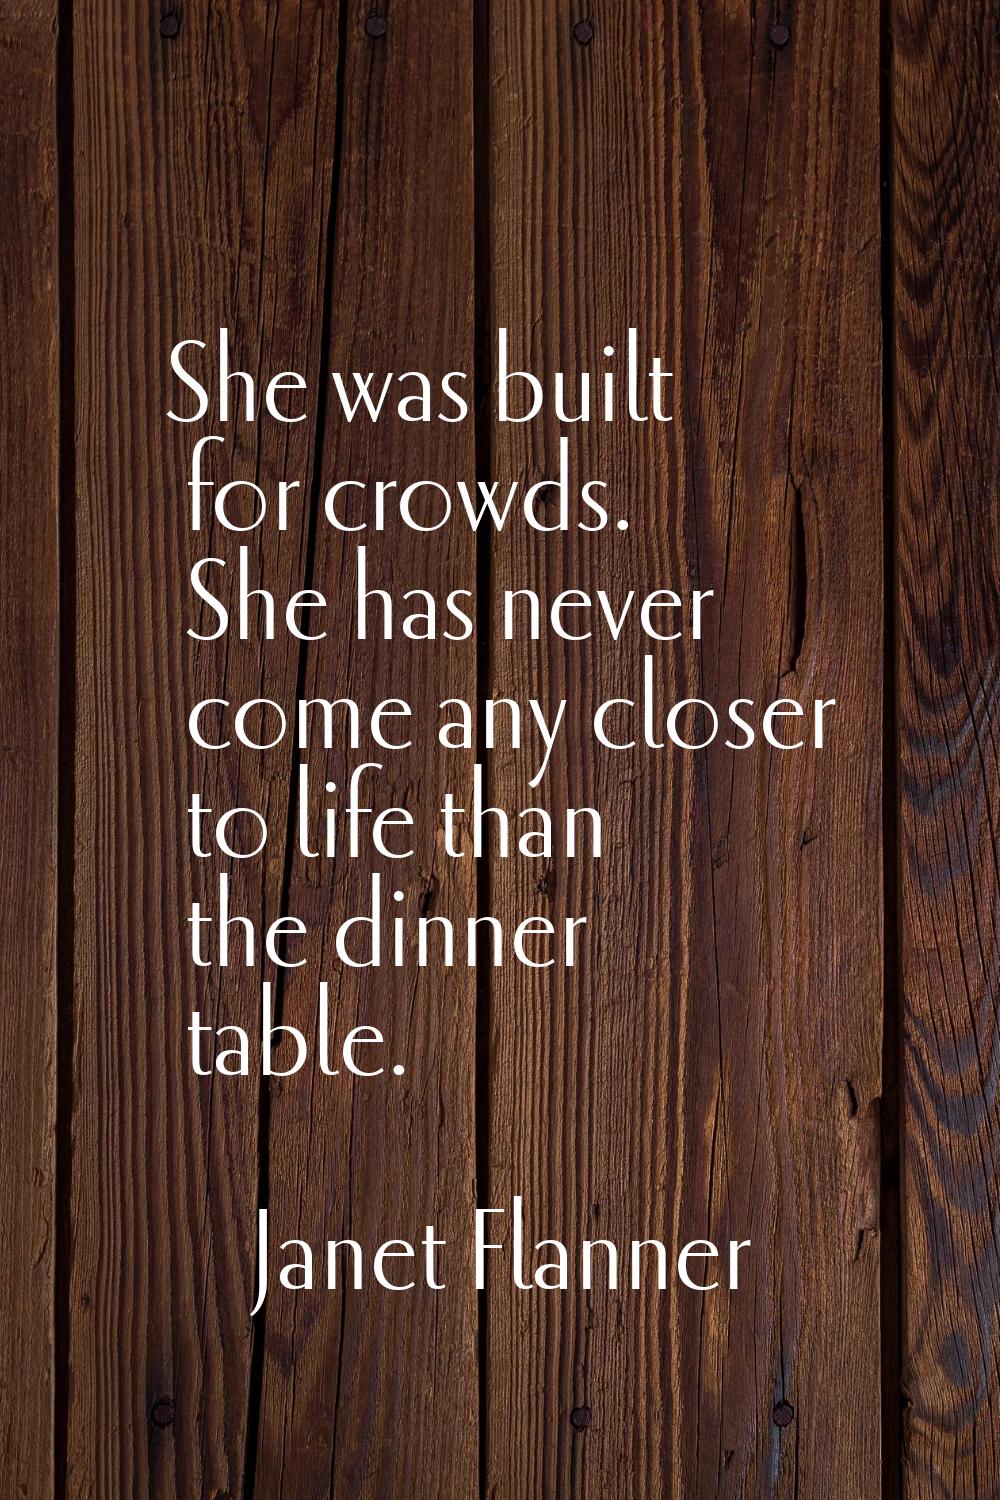 She was built for crowds. She has never come any closer to life than the dinner table.